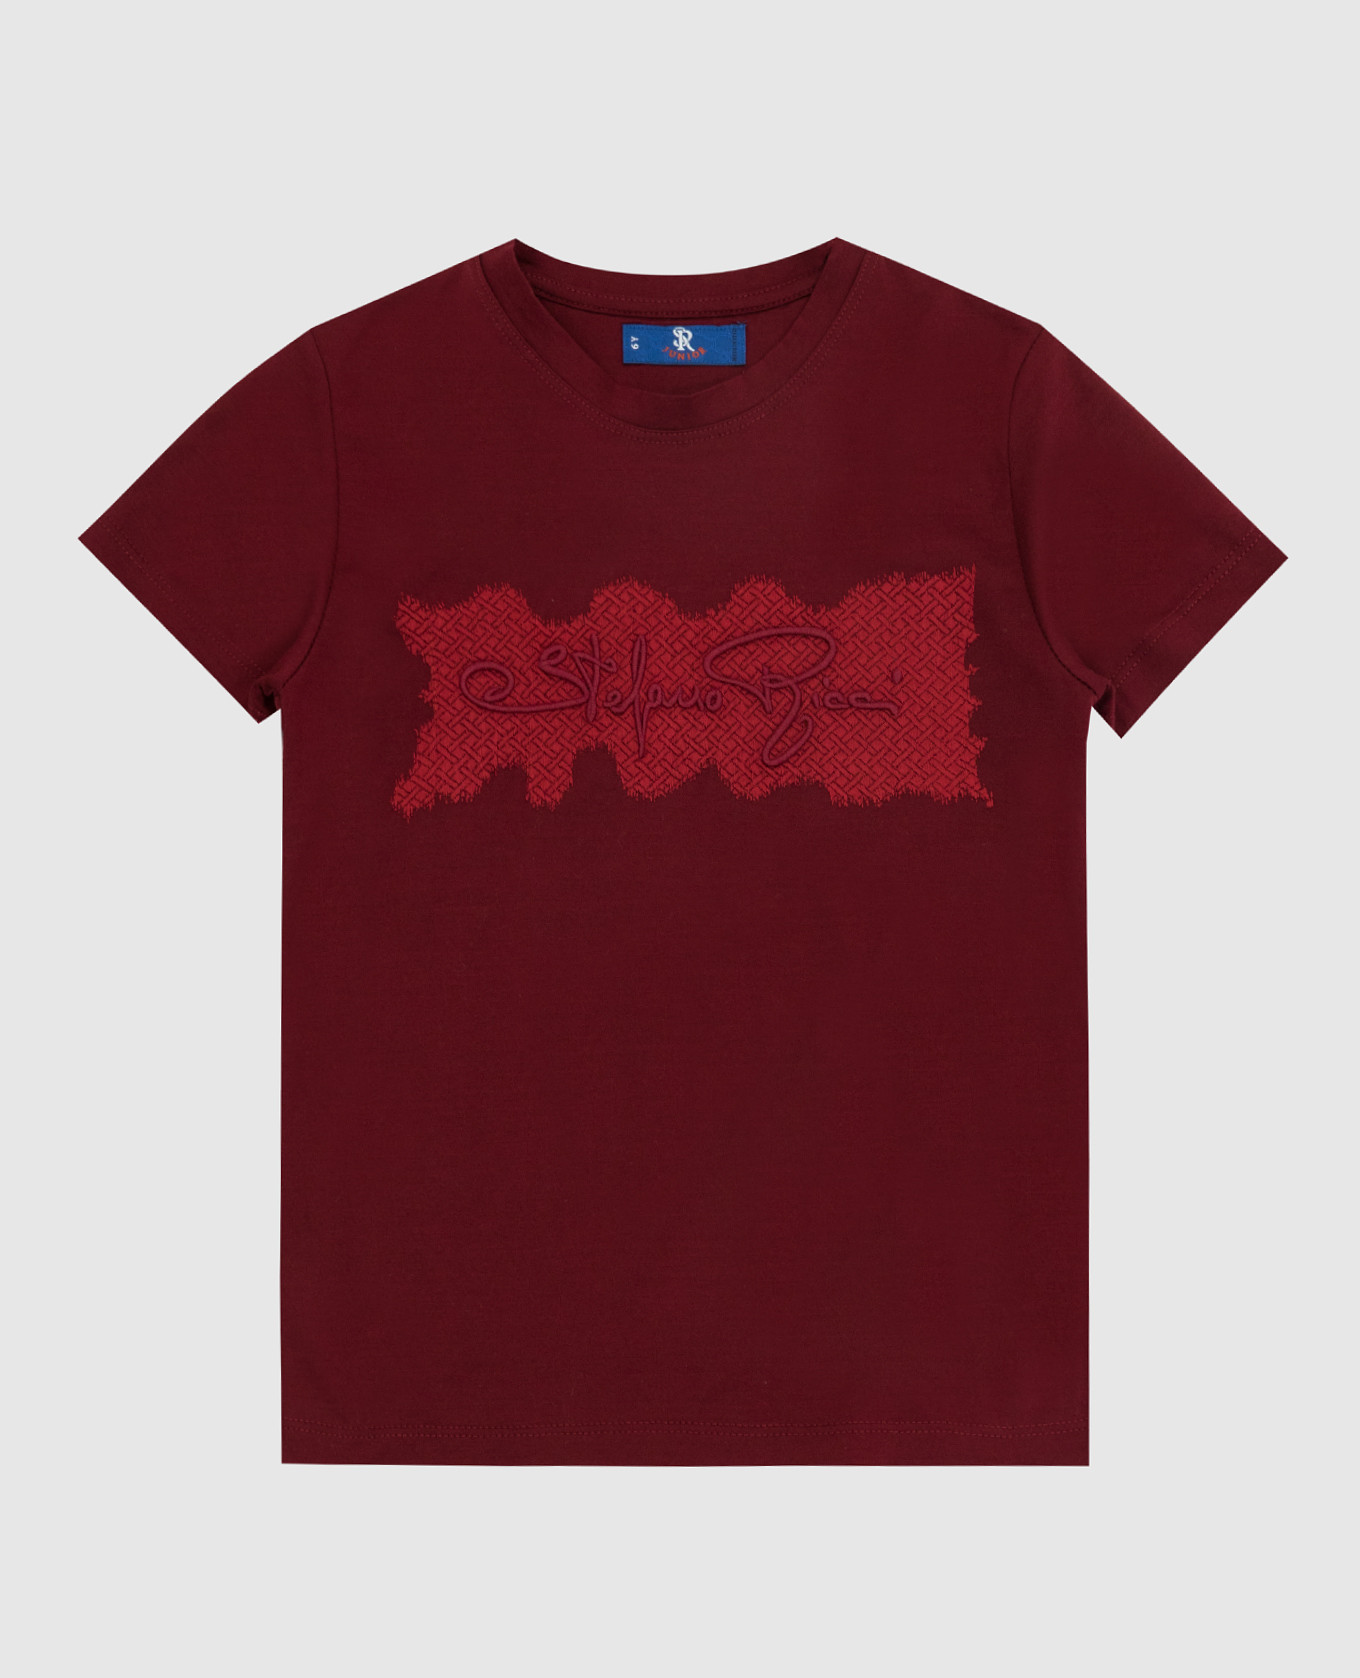 Children's red t-shirt with logo